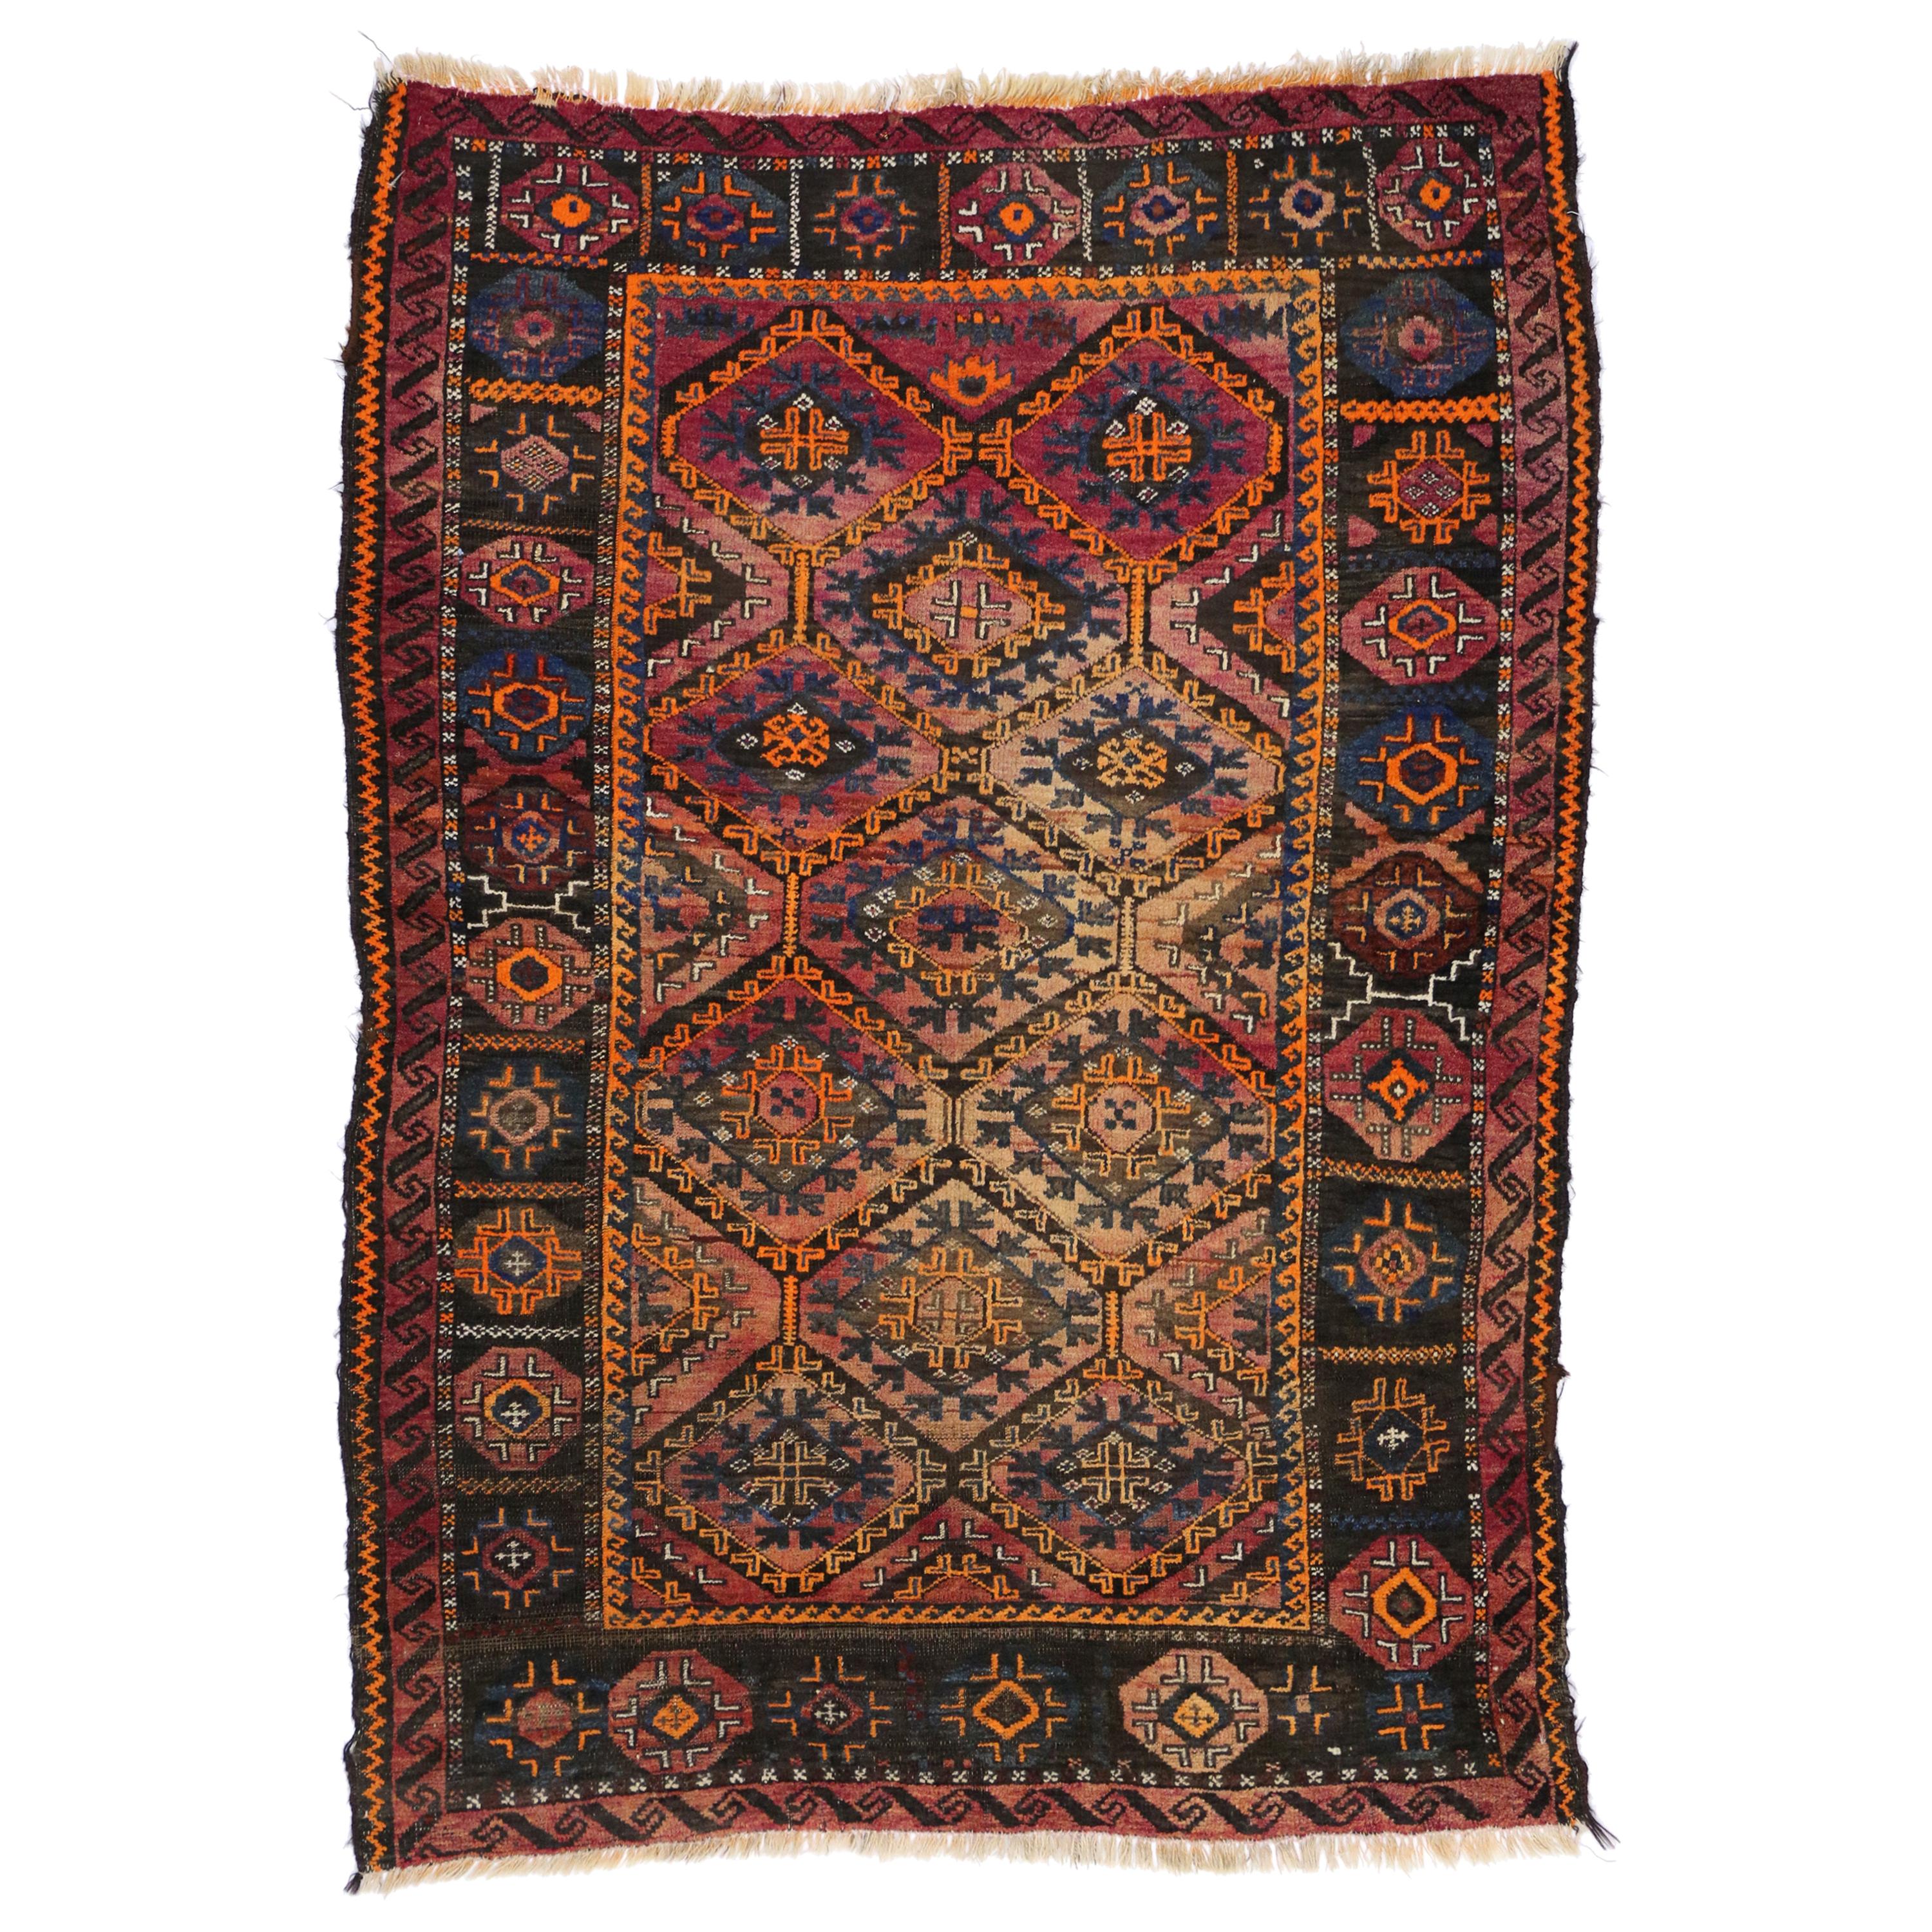 Antique Persian Shiraz Rug with Mid-Century Modern Tribal Style